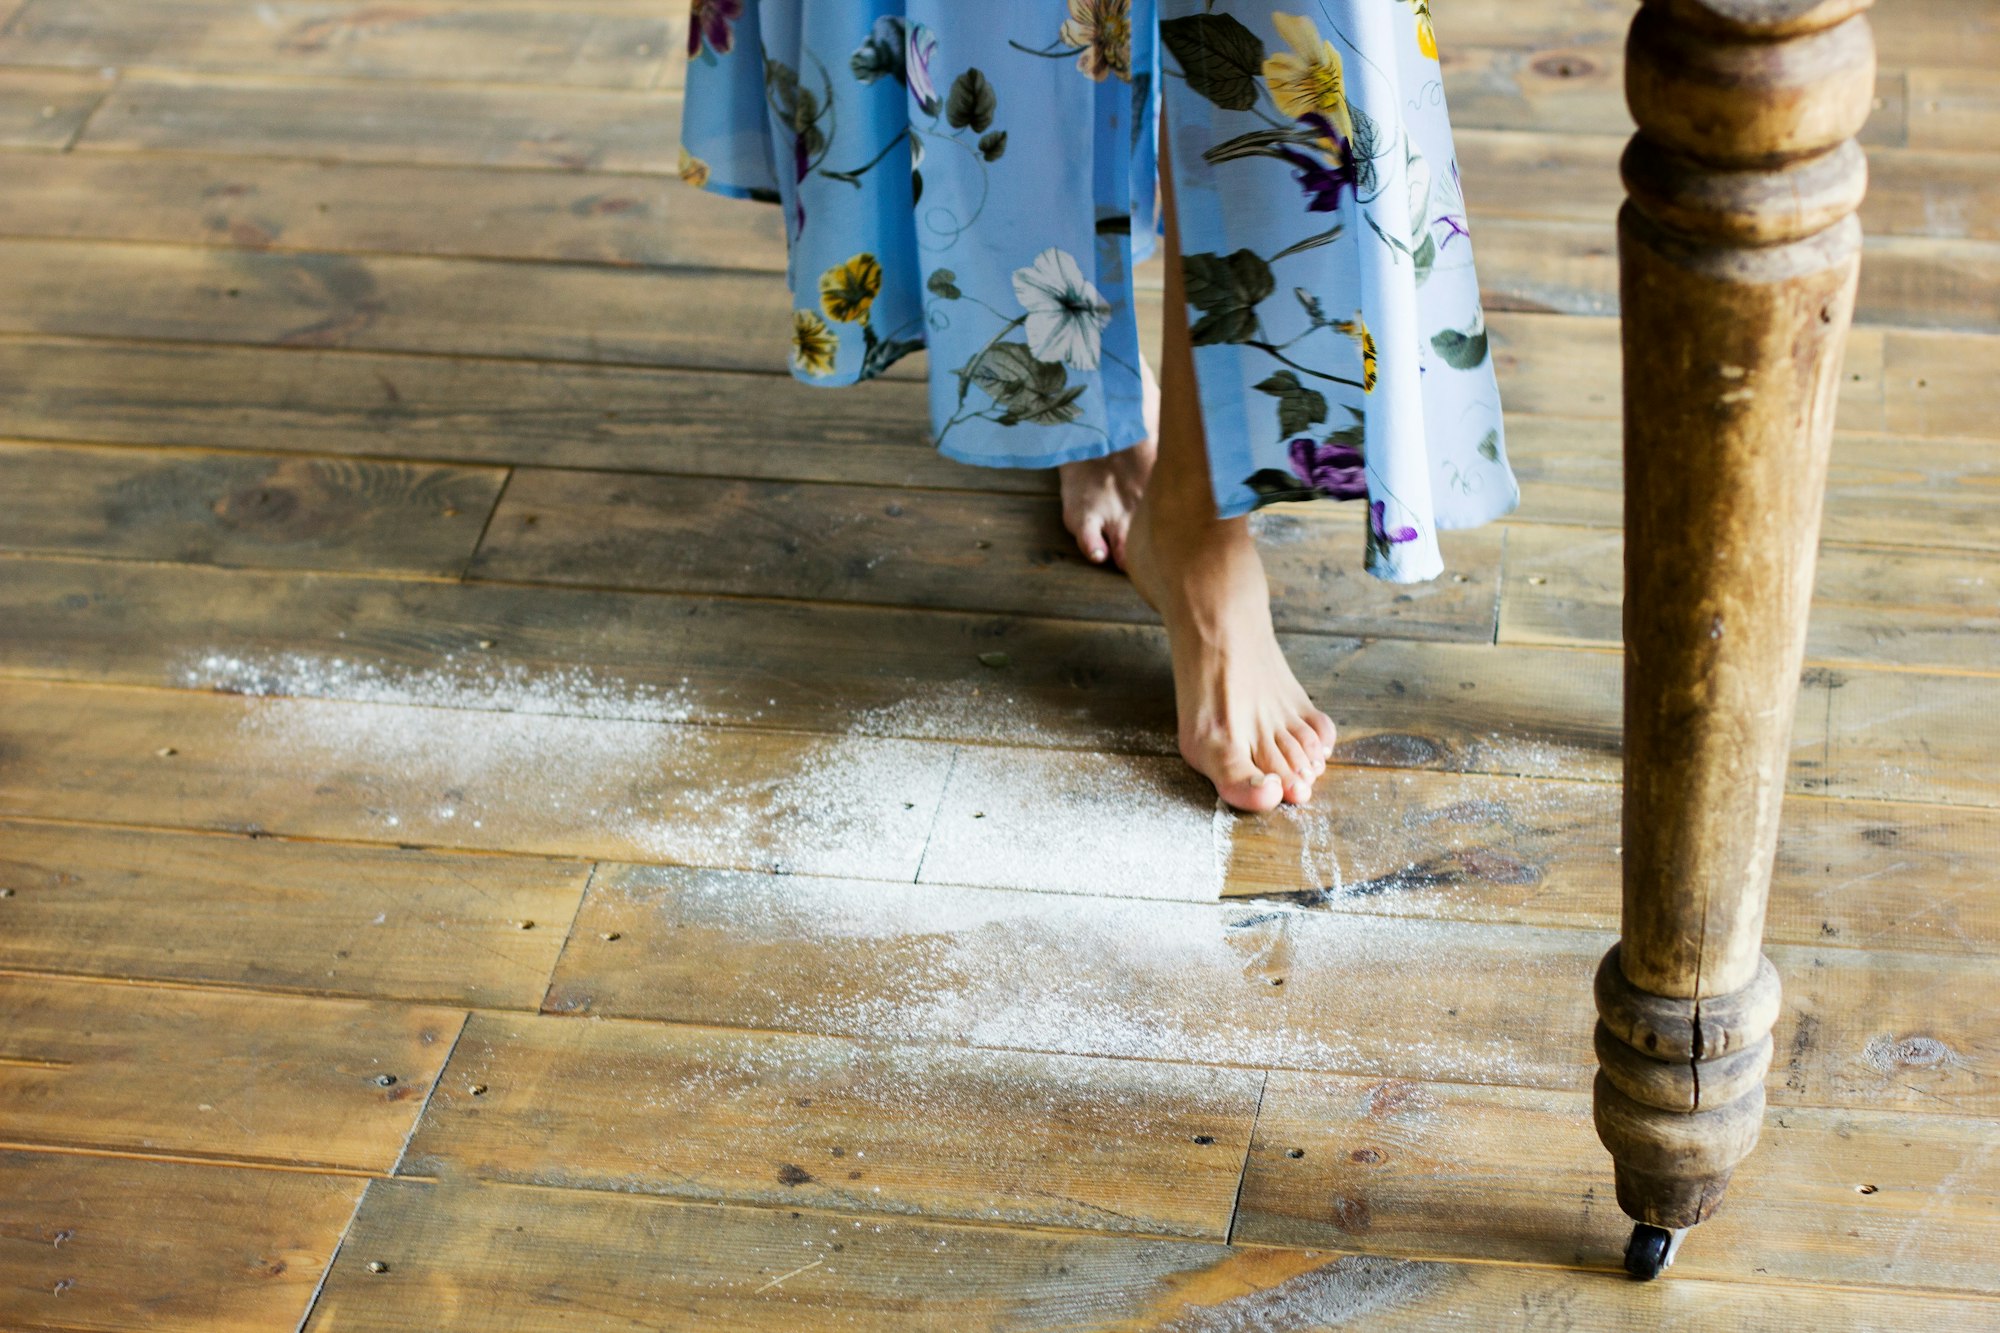 Female feet on the wooden floor of the kitchen with flour